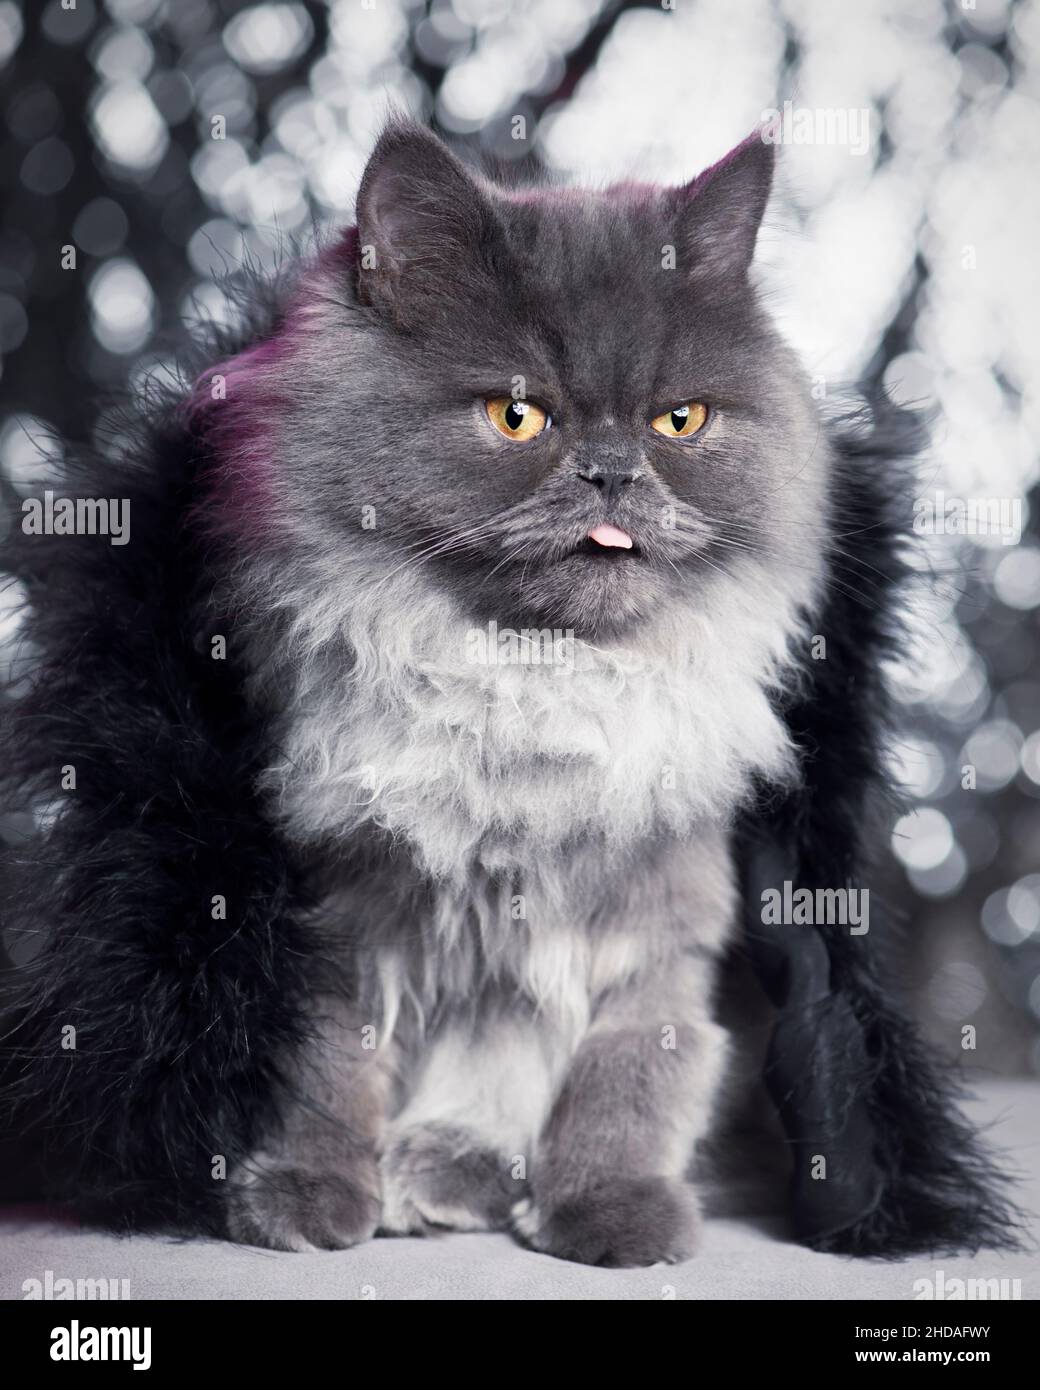 Funny glamorous grey cat wearing black feathers with his tongue out. Stock Photo